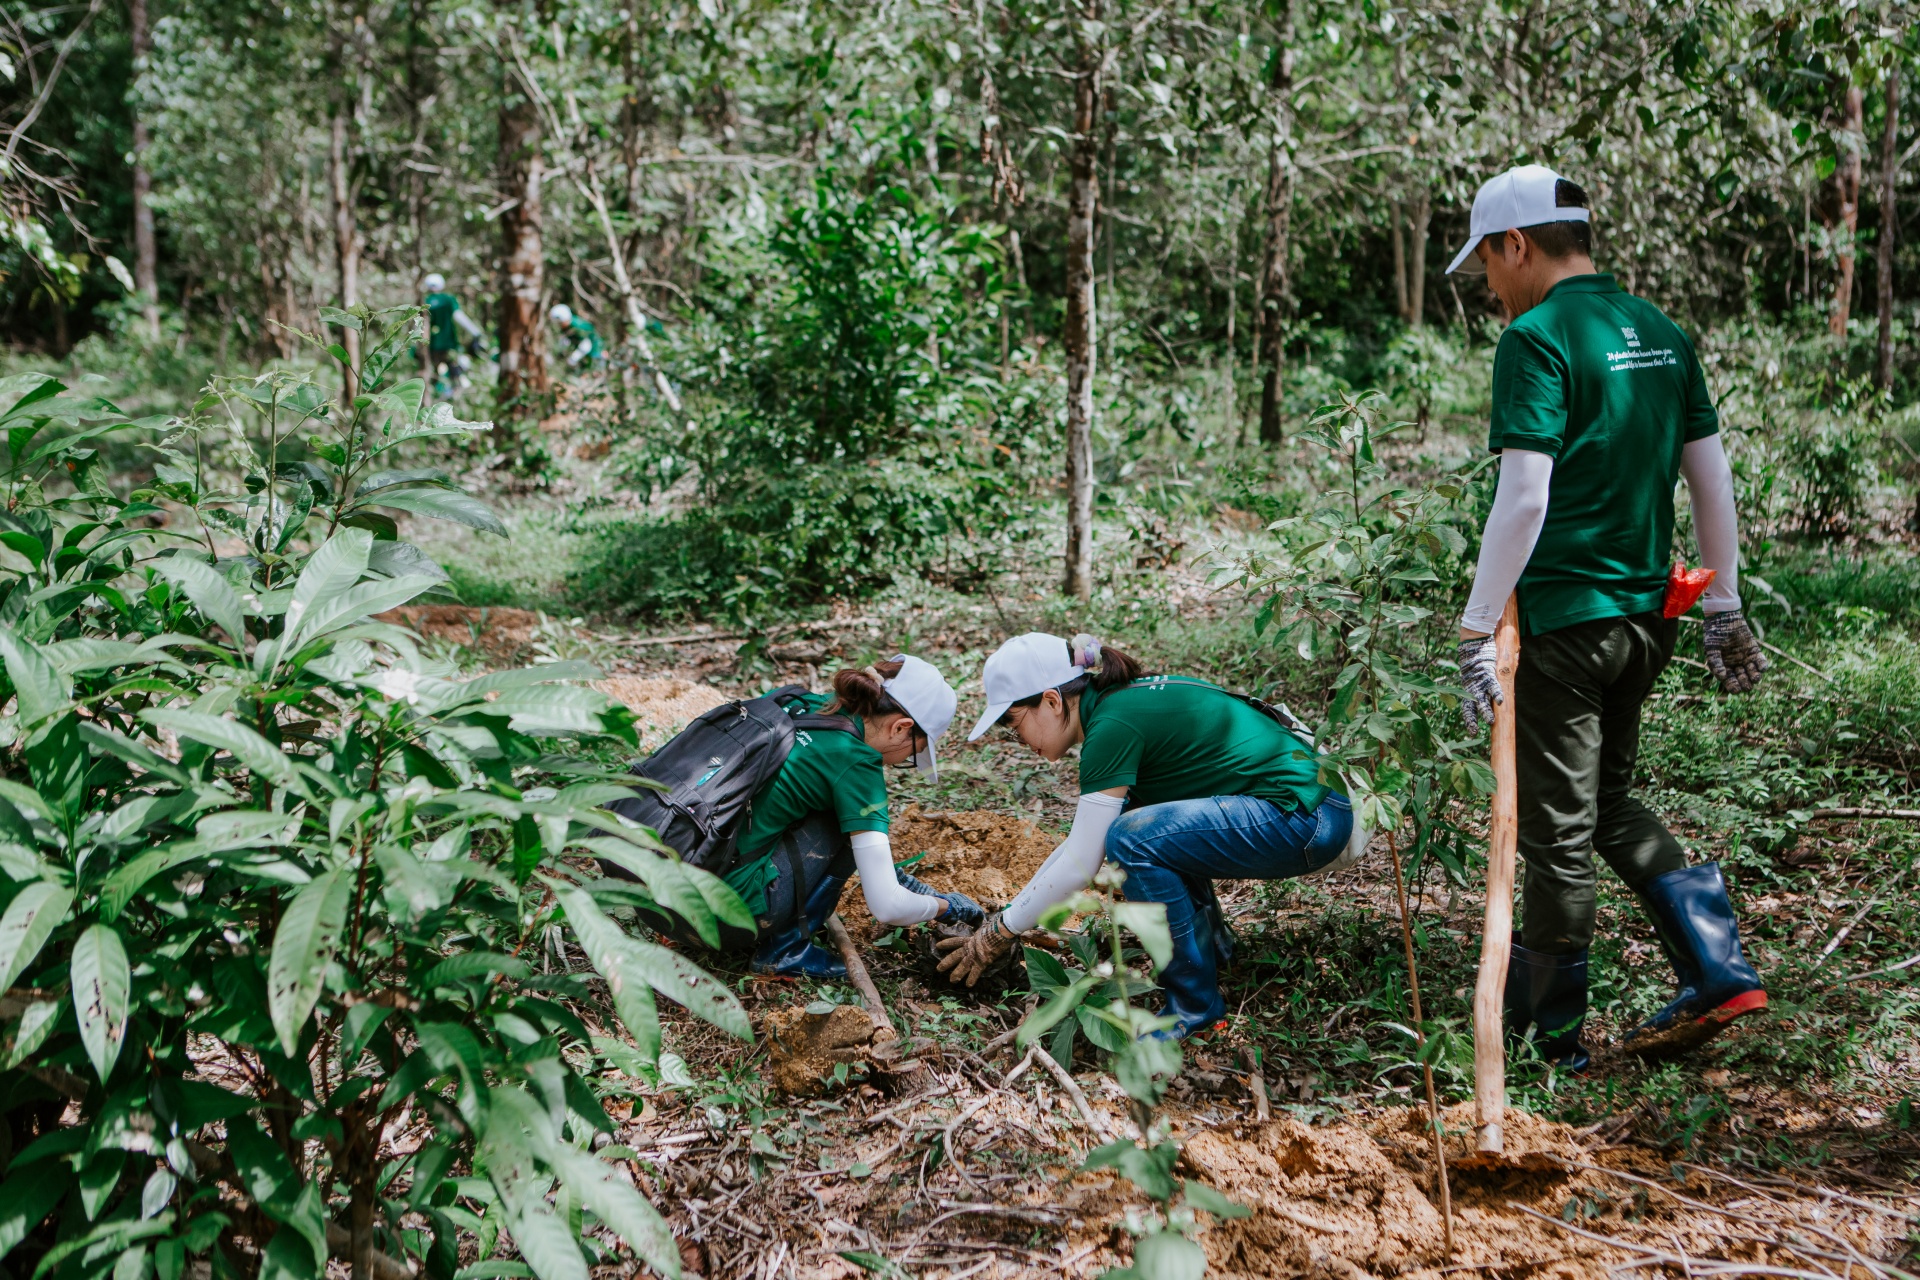 nestle recognised for efforts to protect forests